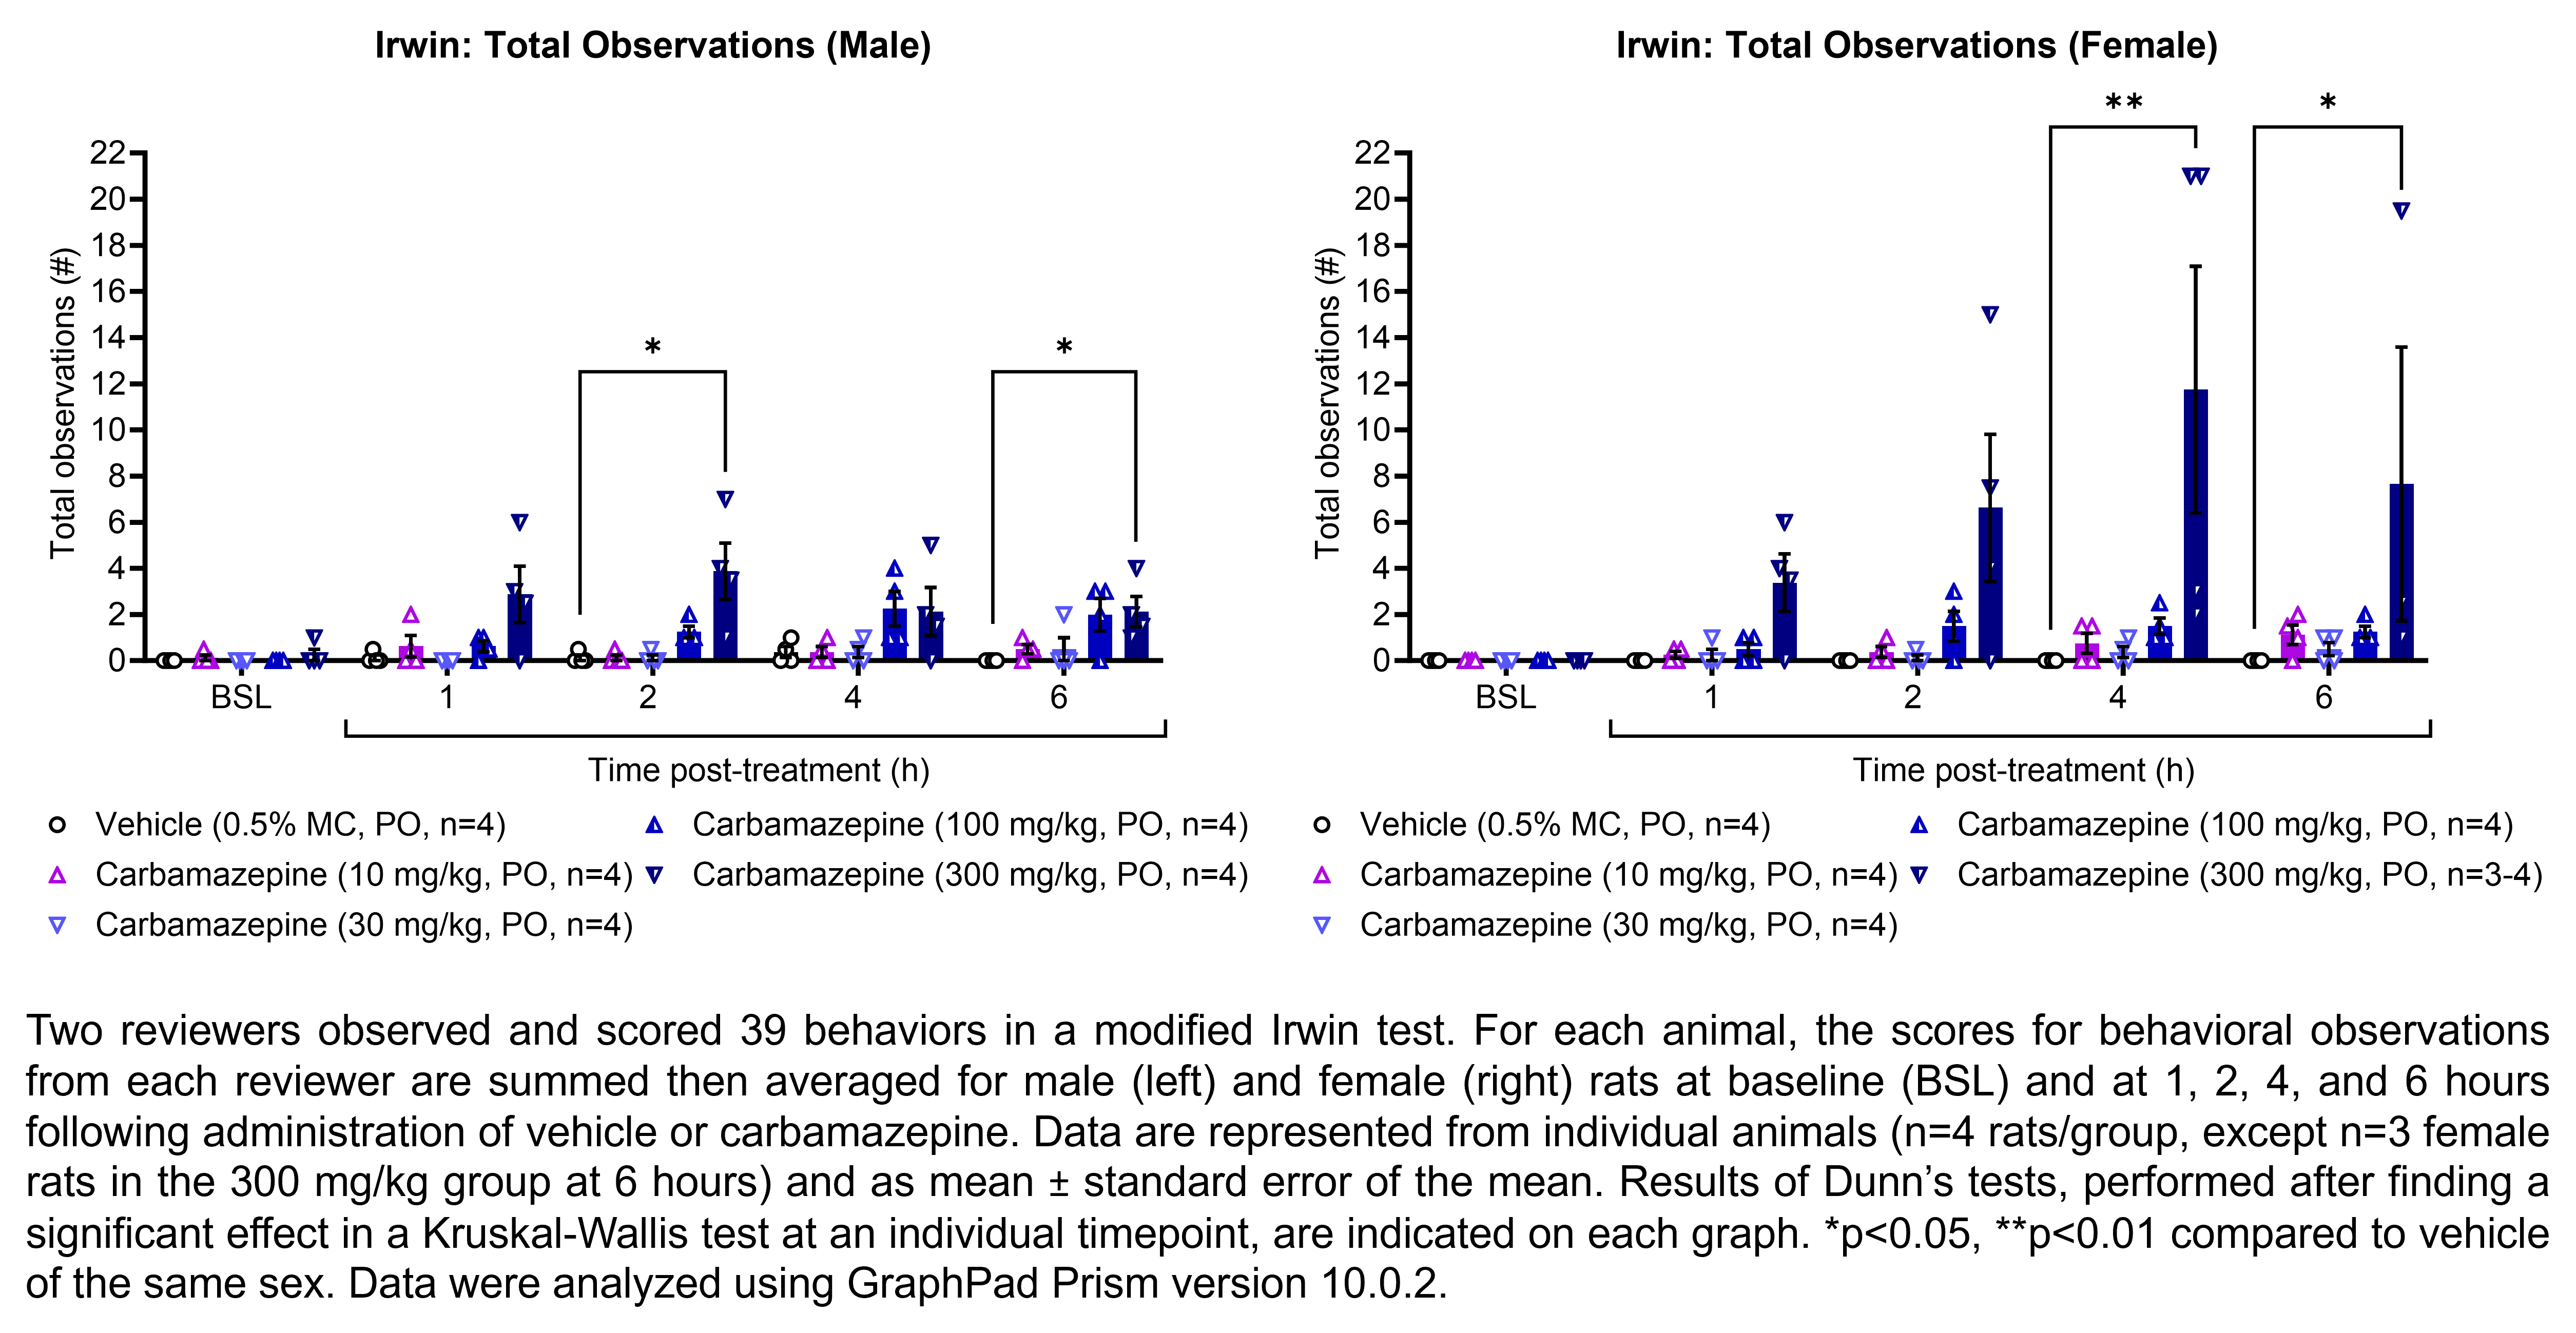 Two reviewers observed and scored 39 behaviors in a modified Irwin test. For each animal, the scores for behavioral observations from each reviewer are summed then averaged for male and female rats (shown on two graphs). Responses are shown at the following time points: baseline (before treatment) and at 1, 2, 4, and 6 hours after treatment with vehicle (0.5% methylcellulose, delivered PO) or carbamazepine (10, 30, 100, or 300 mg/kg, delivered PO). There were 4 rats per group. Kruskal-Wallis tests were performed at each timepoint for each sex, followed by Dunn’s tests when a significant effect was observed. Dunn’s tests found an increase in the number of observations relative to vehicle in males at 2 hours and 6 hours post-treatment with 300 mg/kg carbamazepine (p<0.05 for both comparisons). Dunn’s tests found an increase in the number of observations relative to vehicle in females at 4 hours post-treatment with 300 mg/kg carbamazepine (p<0.01) and at 6 hours post-treatment with 300 mg/kg carbamazepine (p<0.05). Data were analyzed using GraphPad Prism version 10.0.2